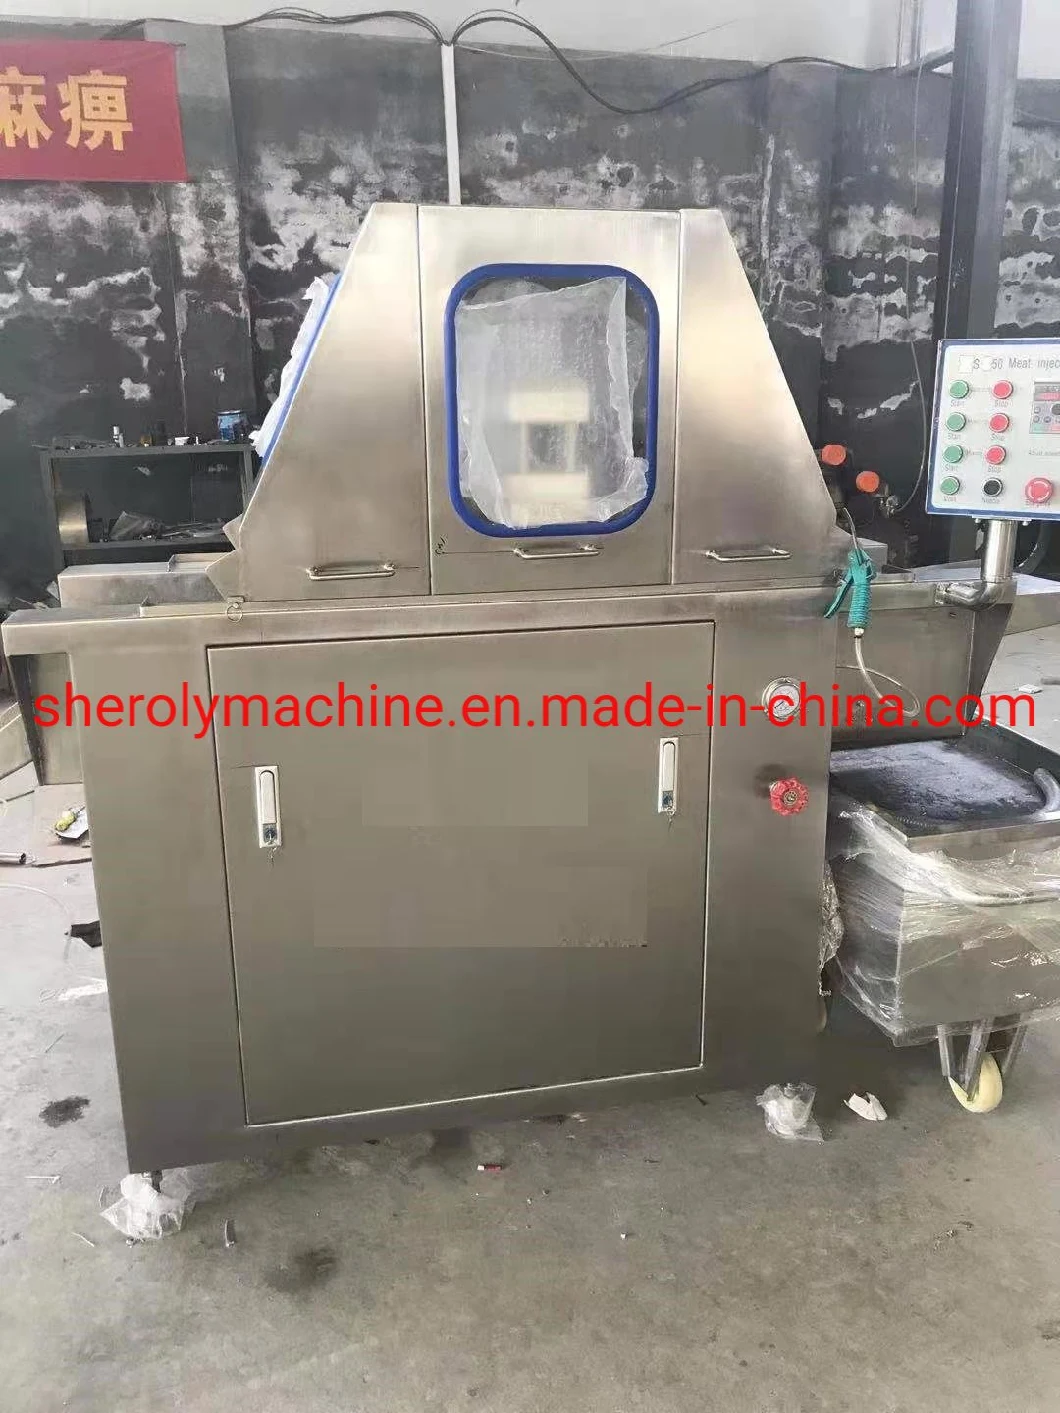 Injector for Meat Processing Machine-Injector-Chicken Injector